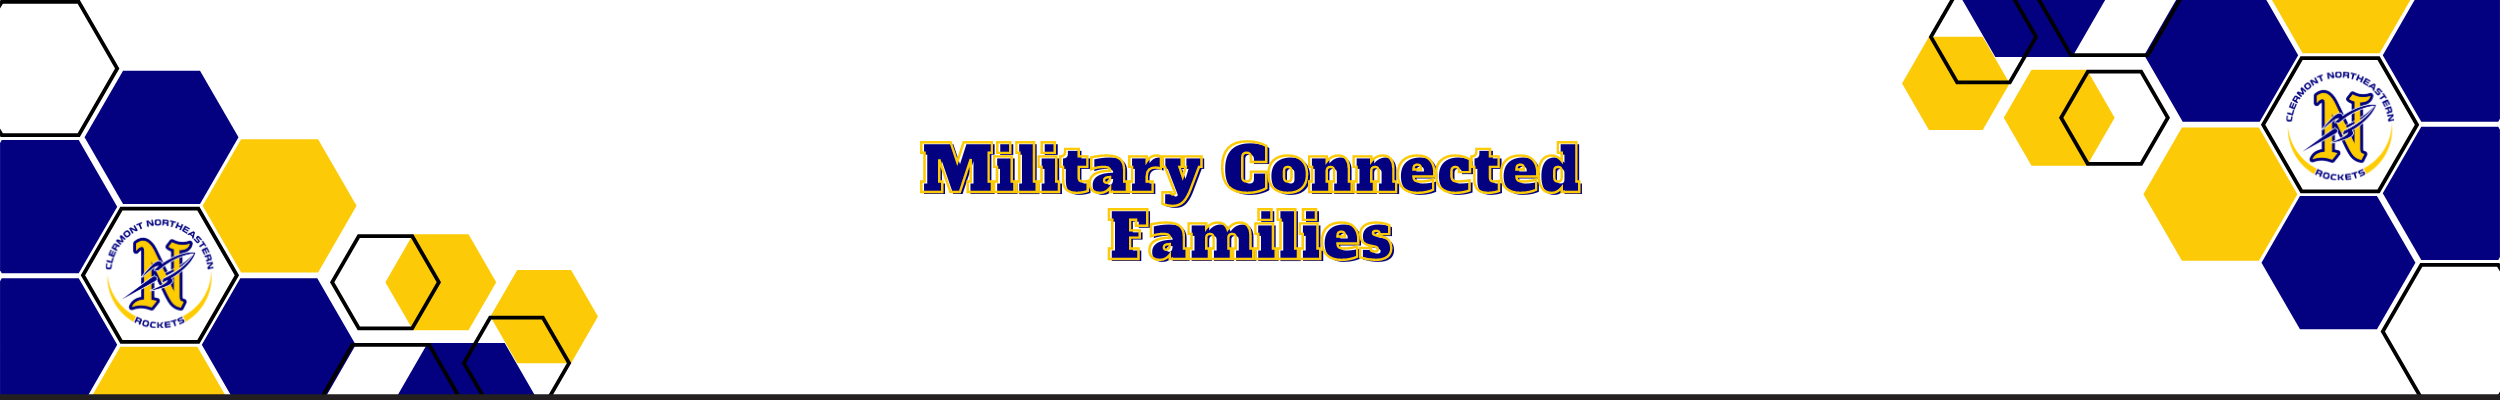 Military Connected Families